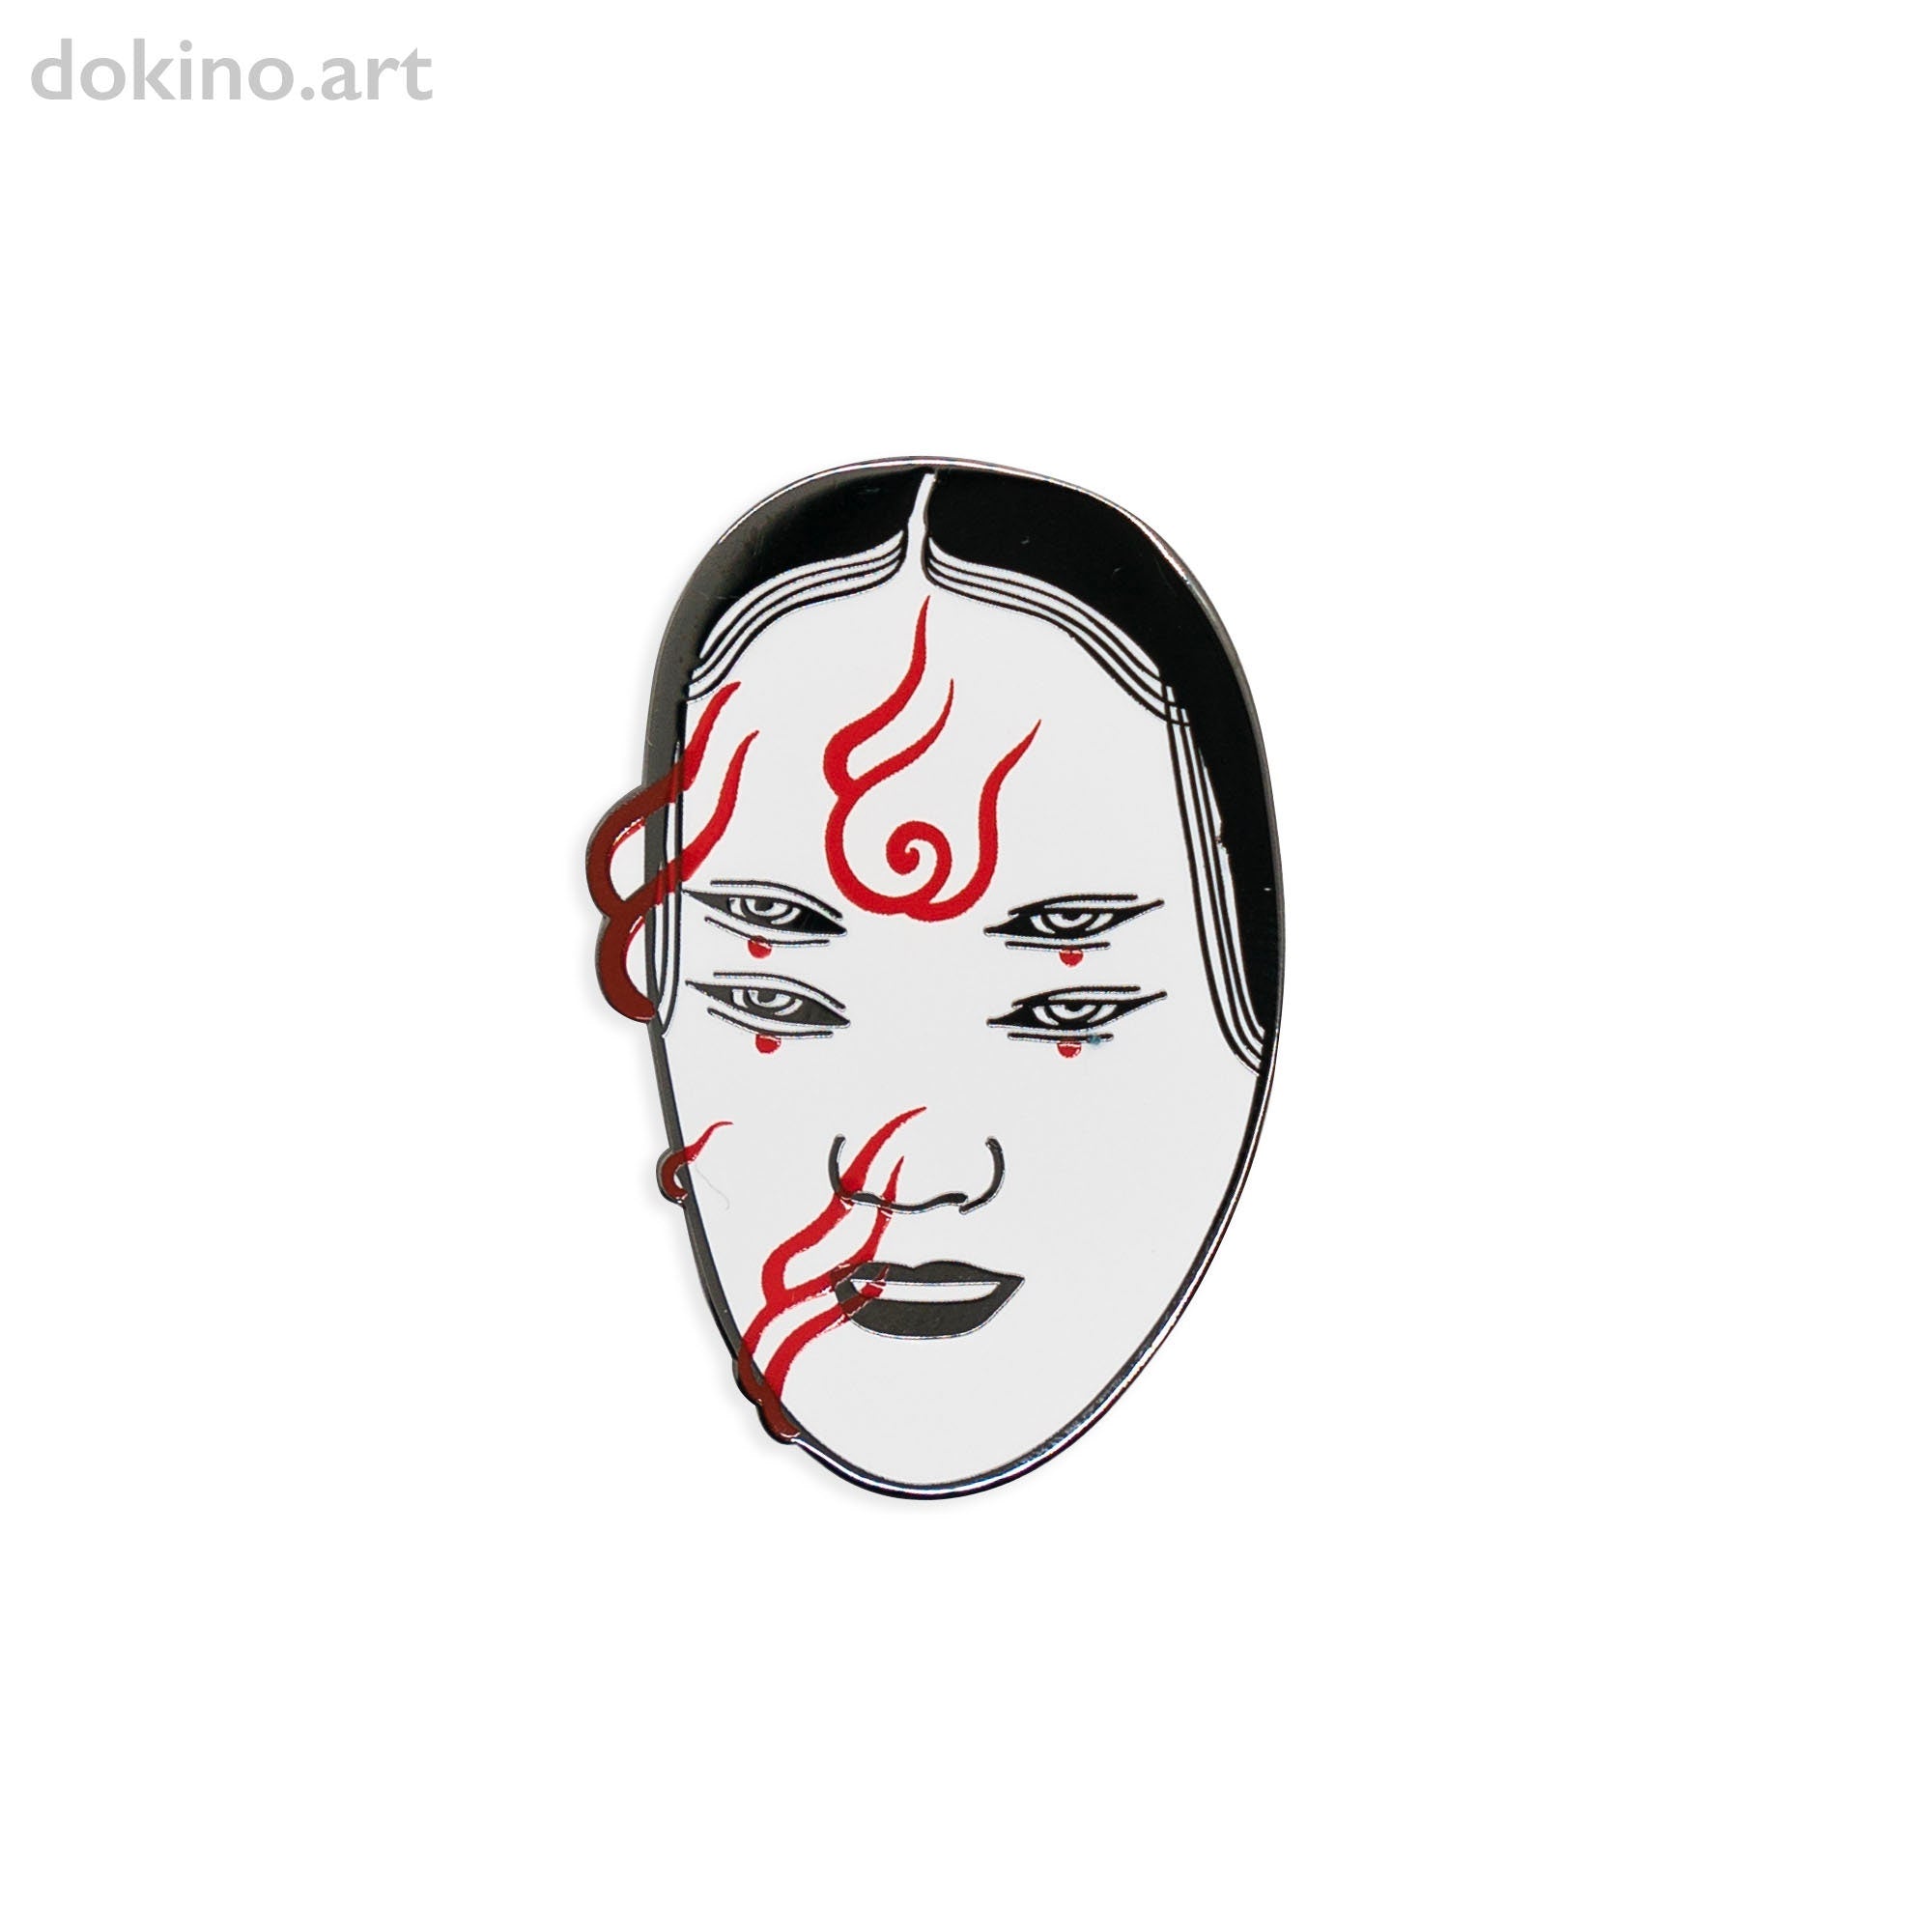 4 EYES - Japanese Tattoo Pin - Limited Edition Collaboration Monica Mo